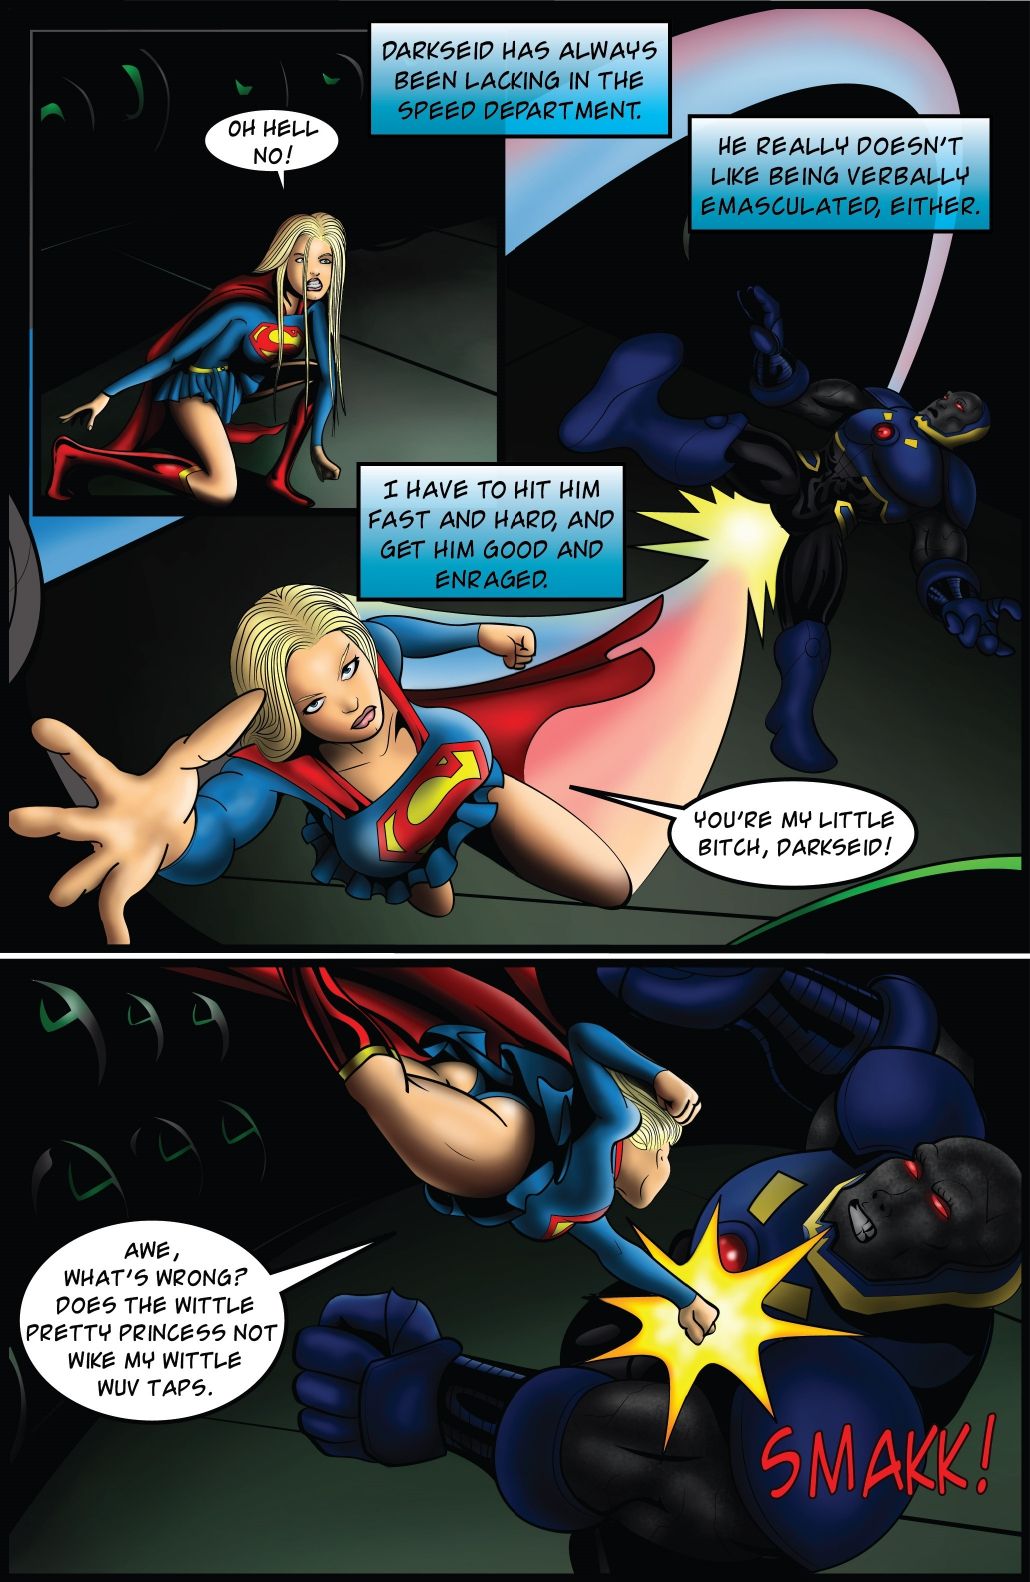 Supergirl: Issue 9 – Countdown to Extinction Part 2 by Roderick Swawyki